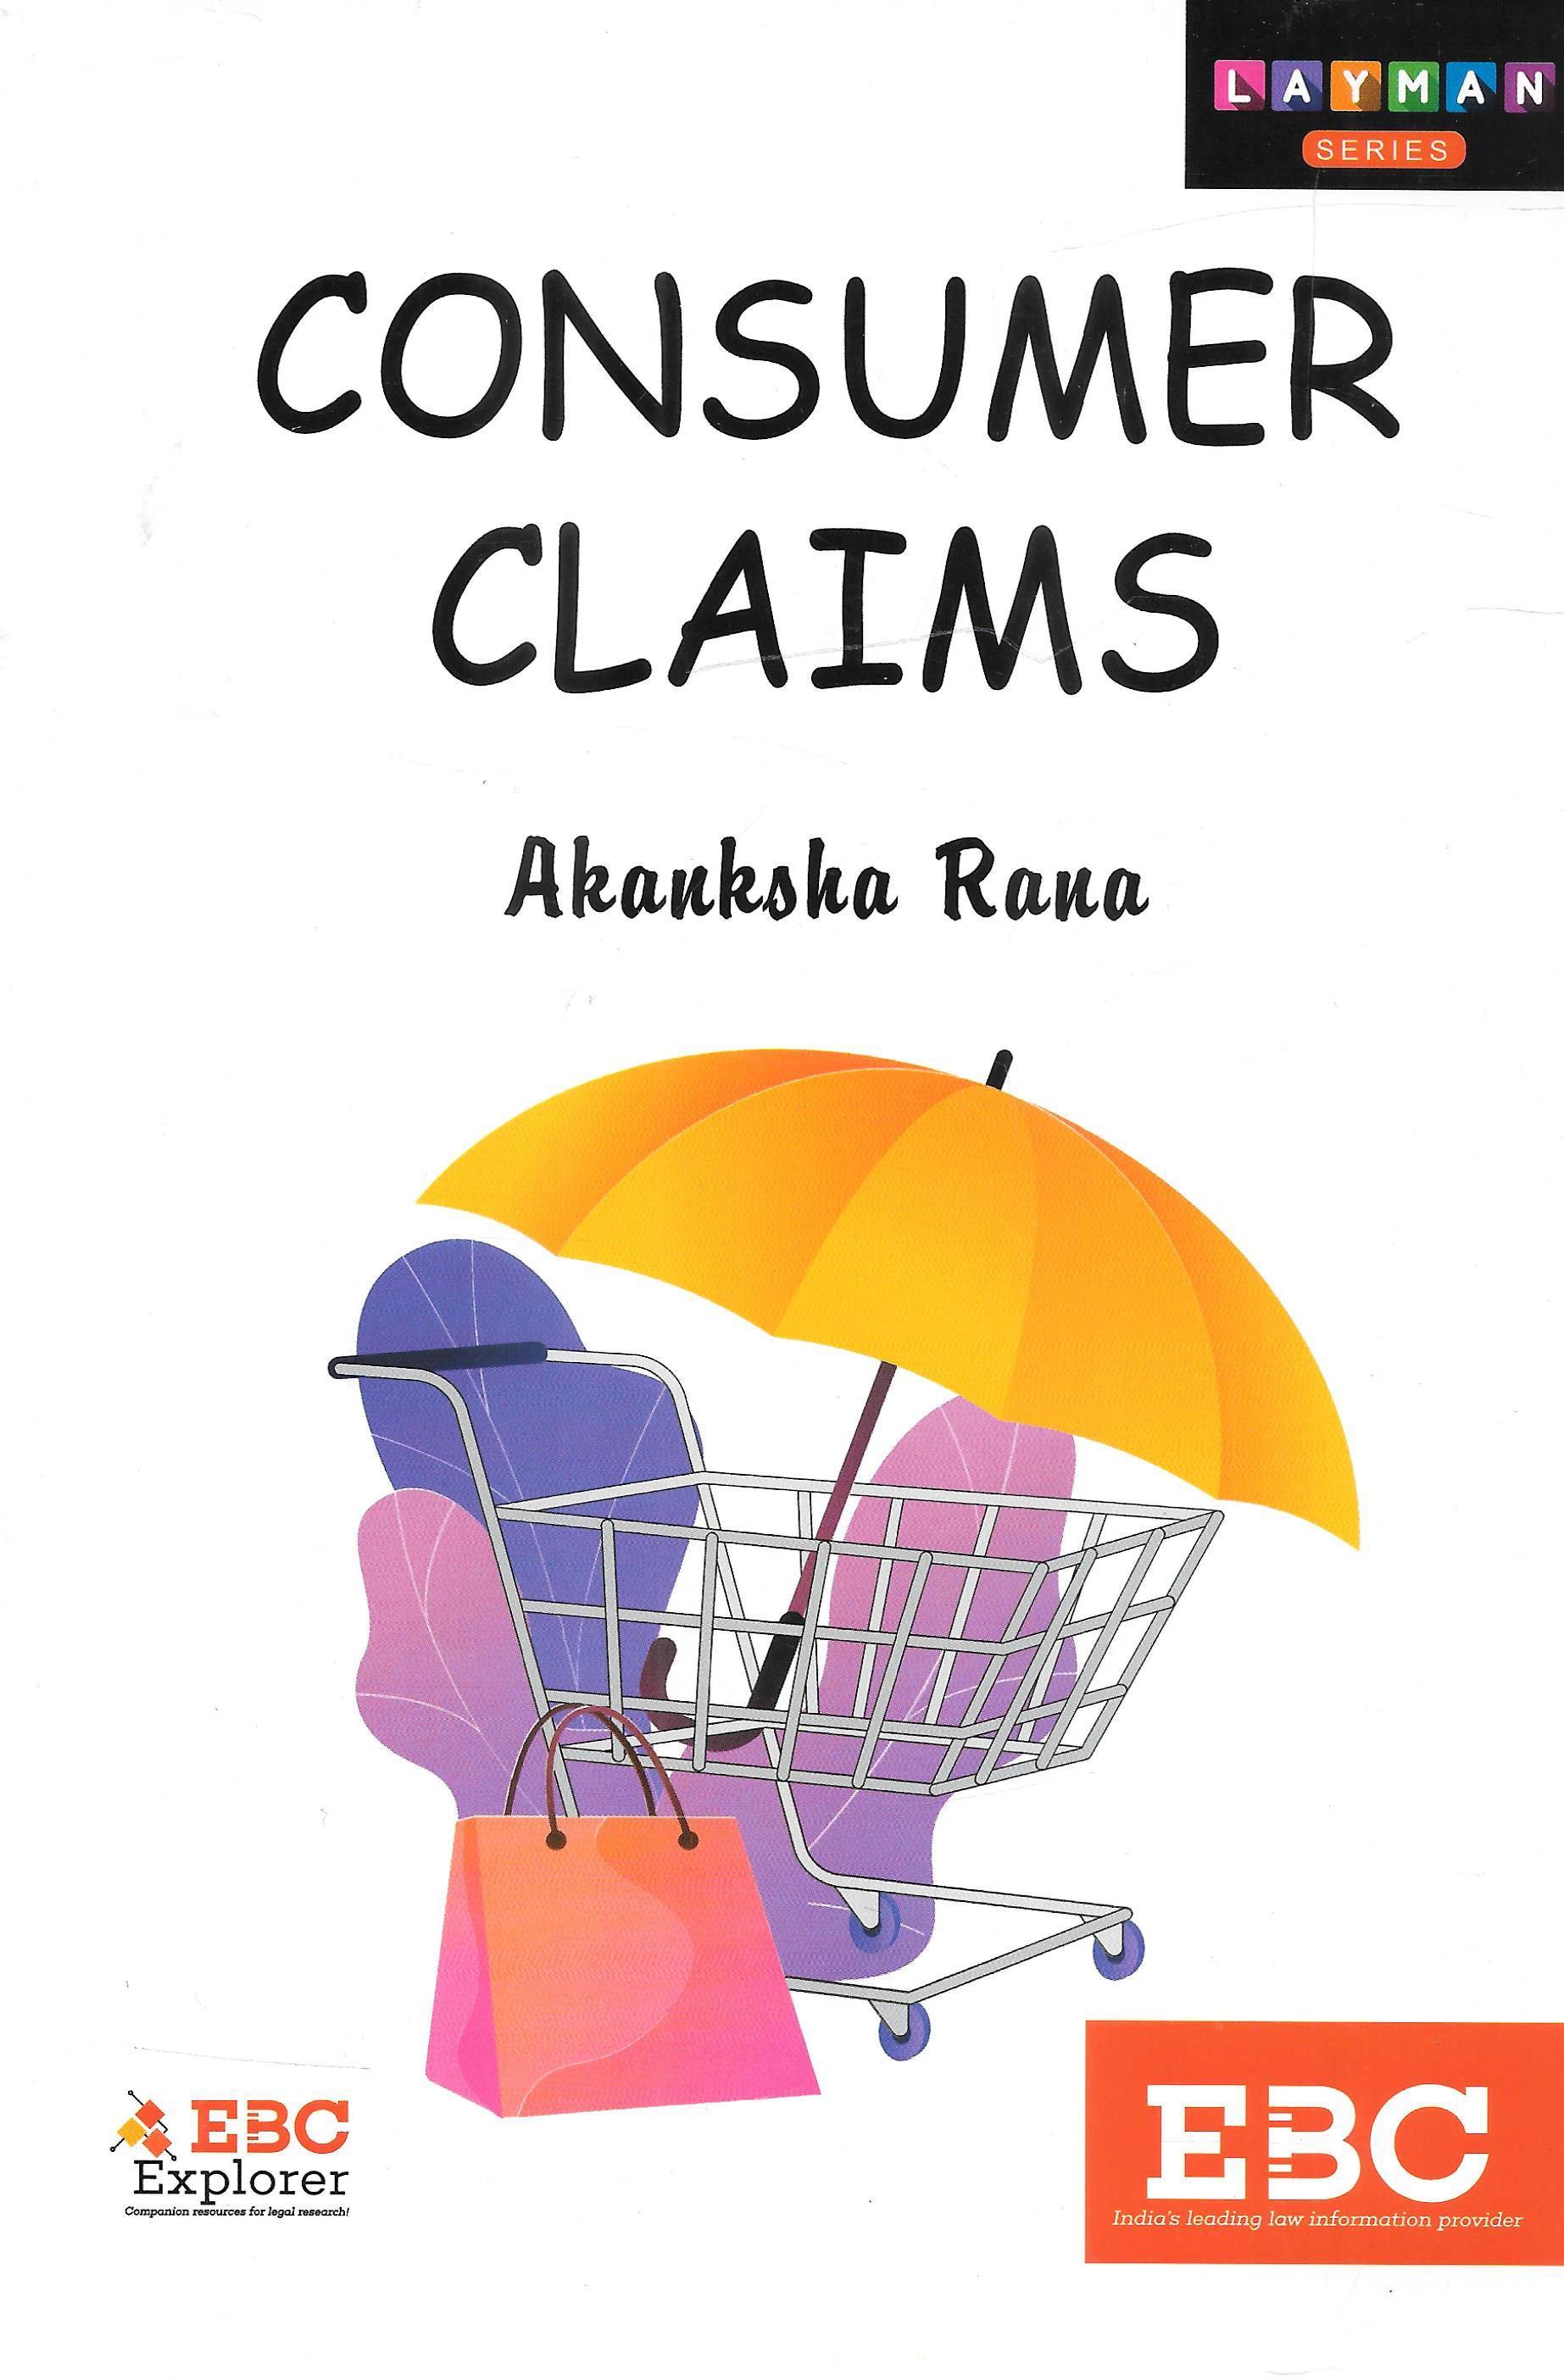 Consumer Claims - M&J Services